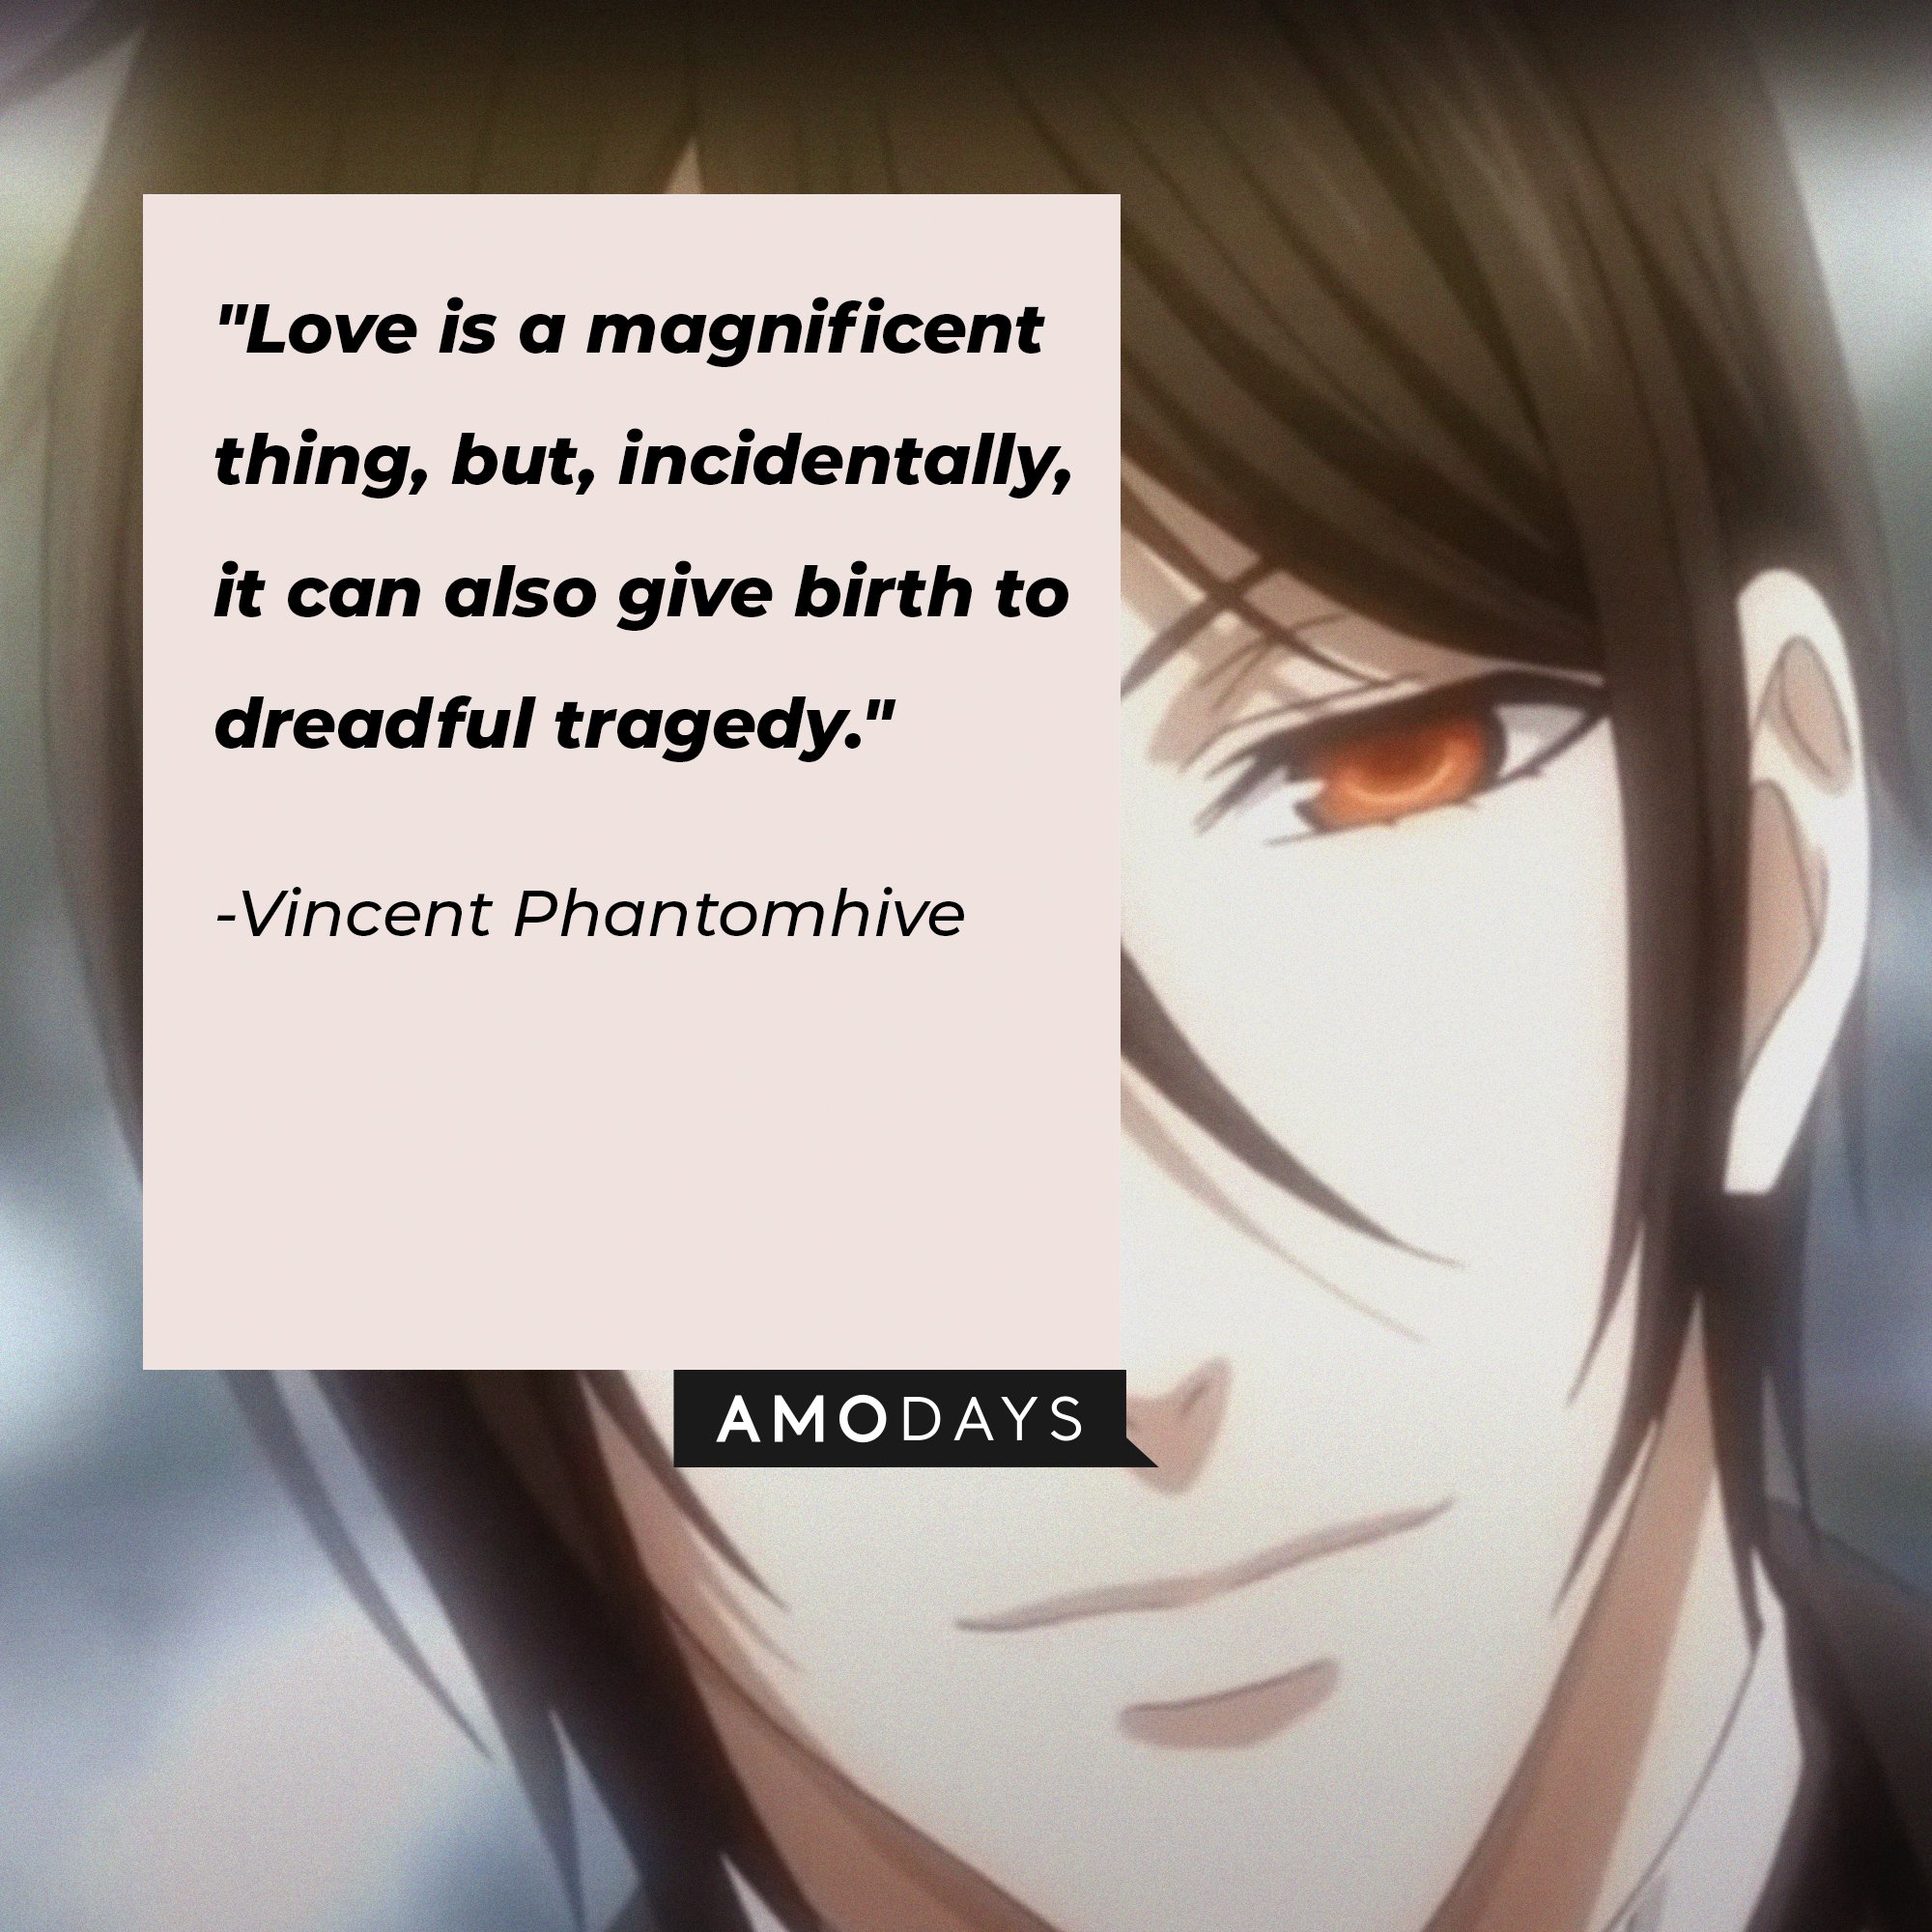 Vincent Phantomhive’s quote: "Love is a magnificent thing, but, incidentally, it can also give birth to dreadful tragedy." | Image: AmoDays